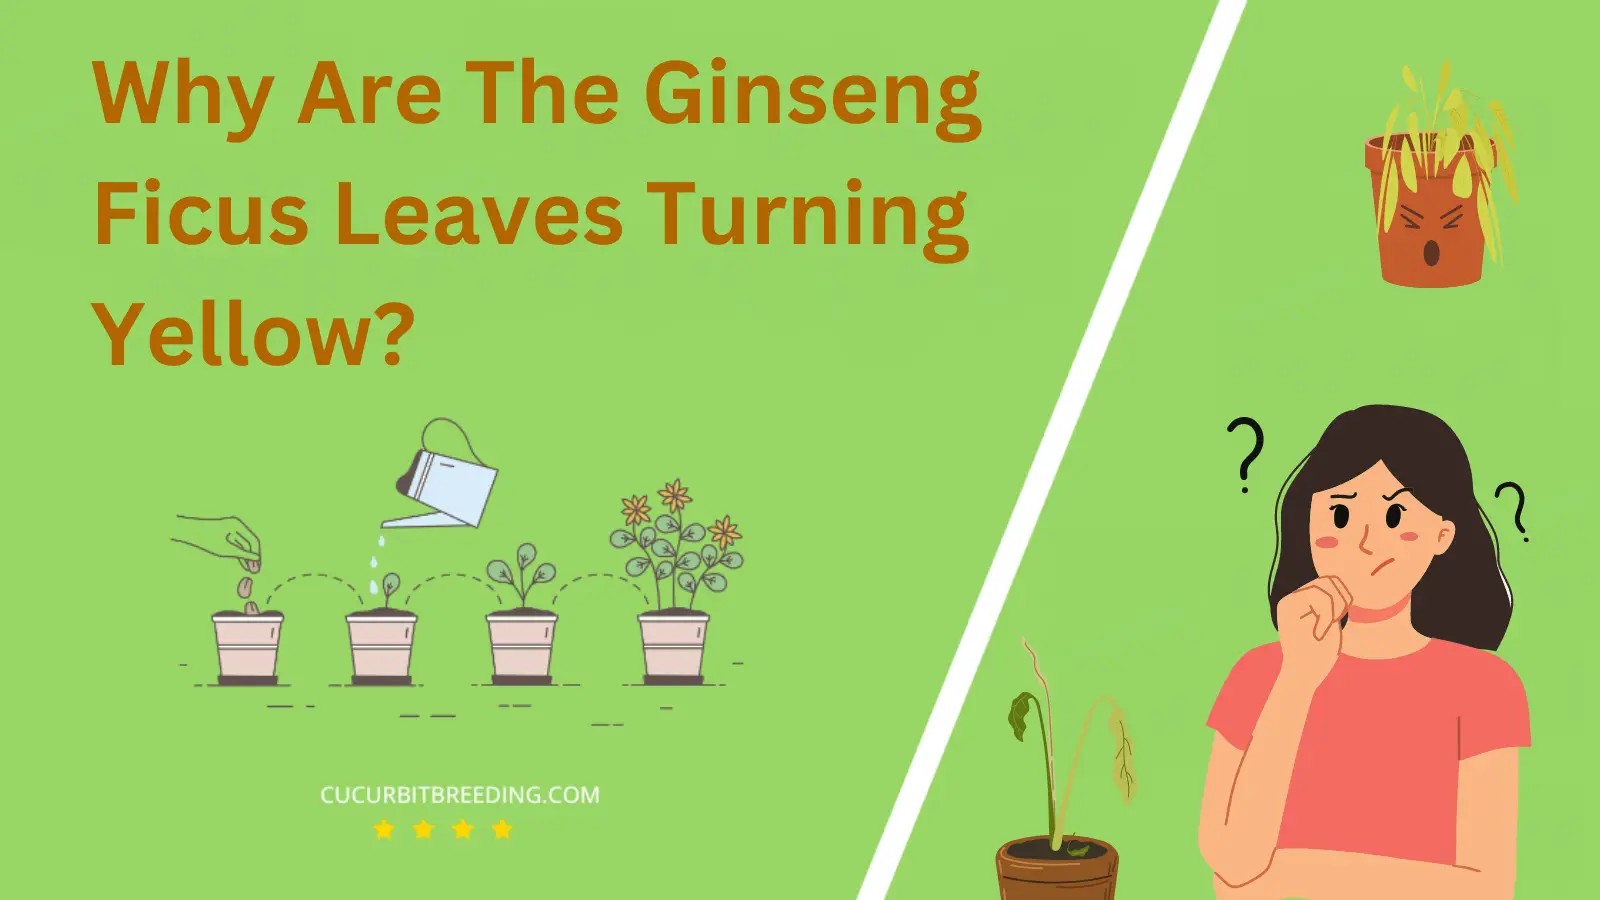 Why Are The Ginseng Ficus Leaves Turning Yellow